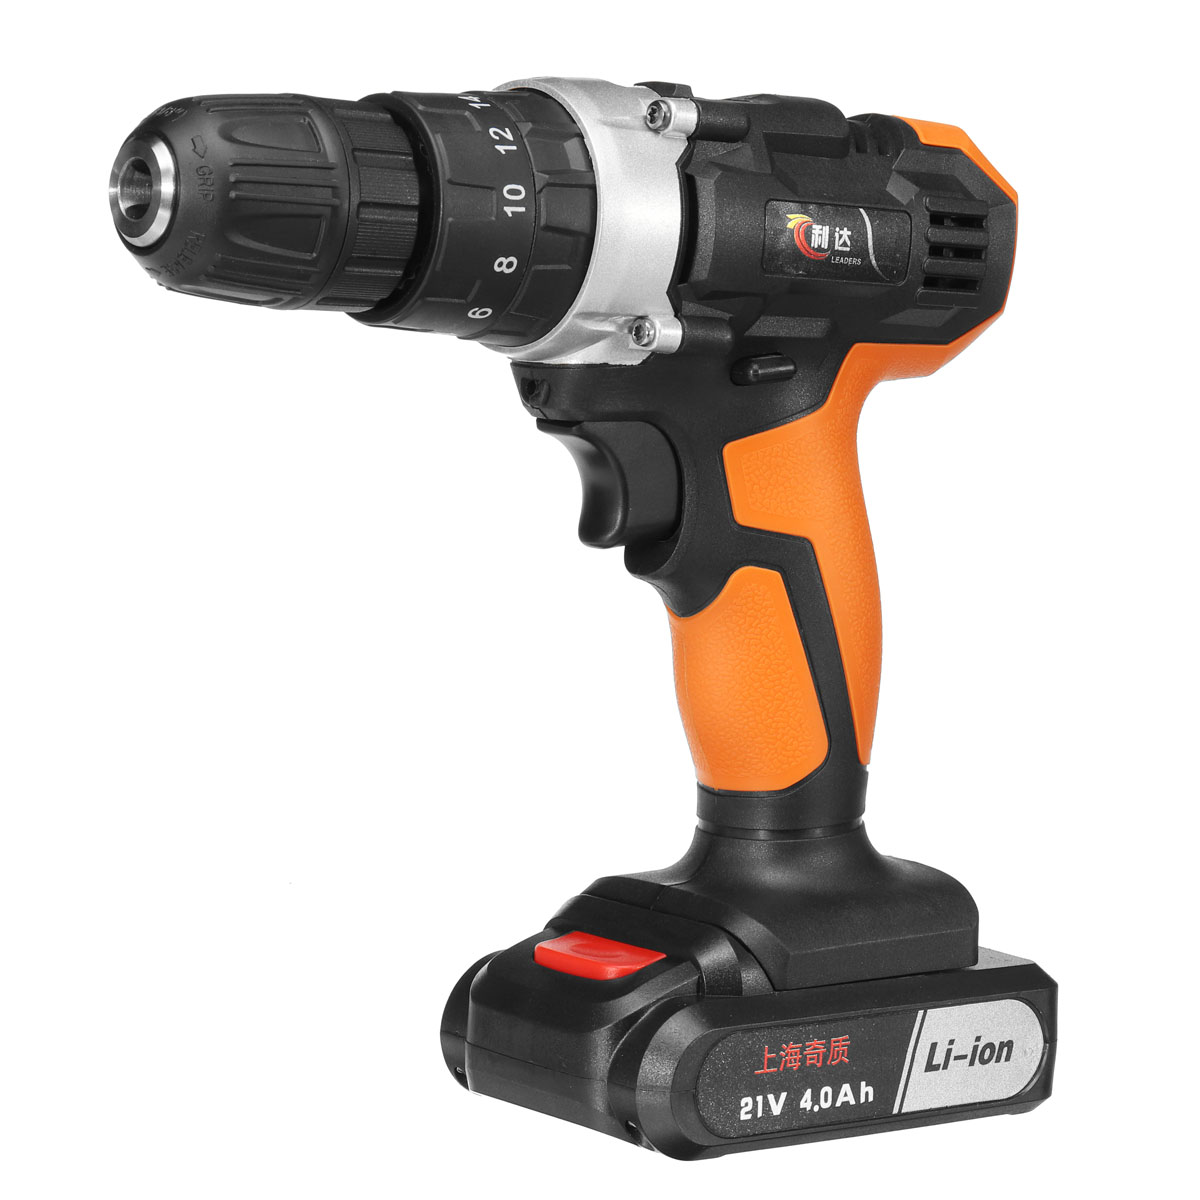 21V-4000mAh-Li-ion-Cordless-Electric-Impact-Drill-183-Clutches-2-Speed-Power-Drills-With-2-Batteries-1412172-4